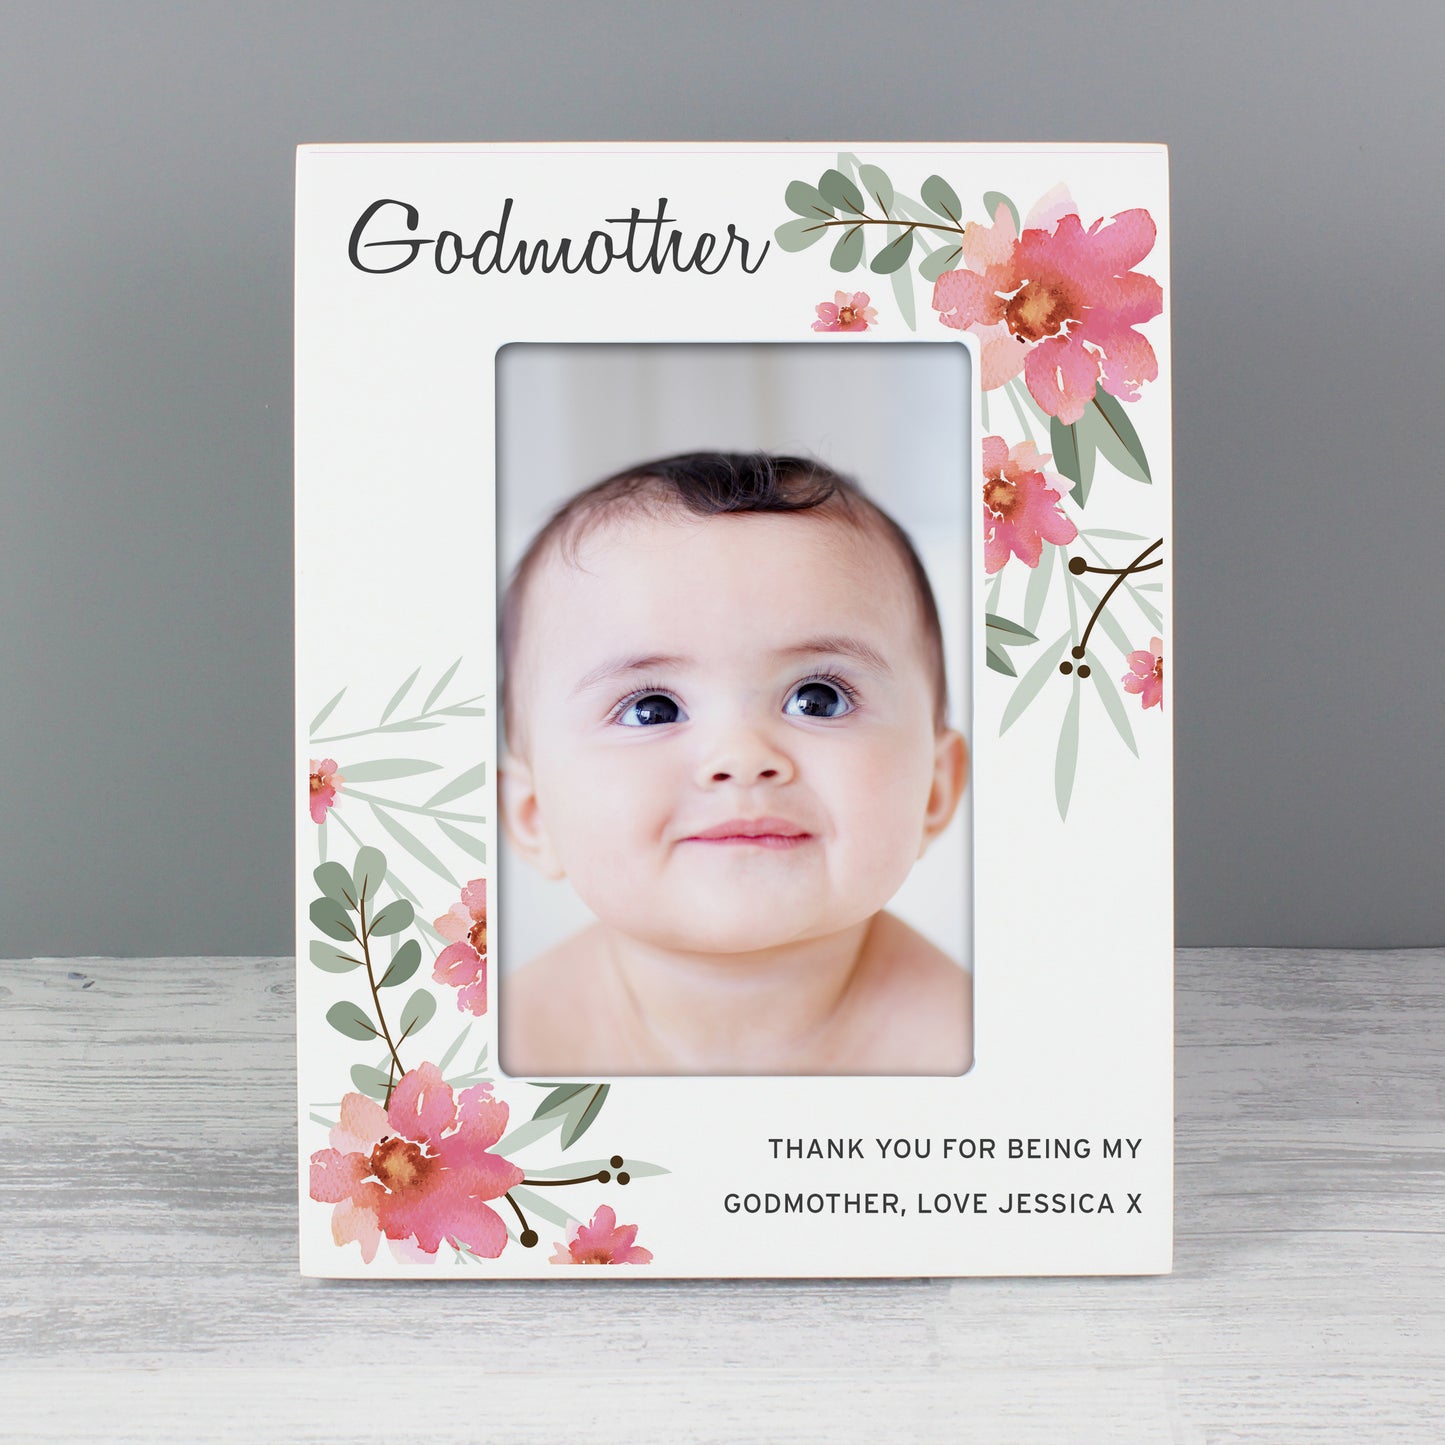 Personalised Godmother Photo Frame - Floral 6x4